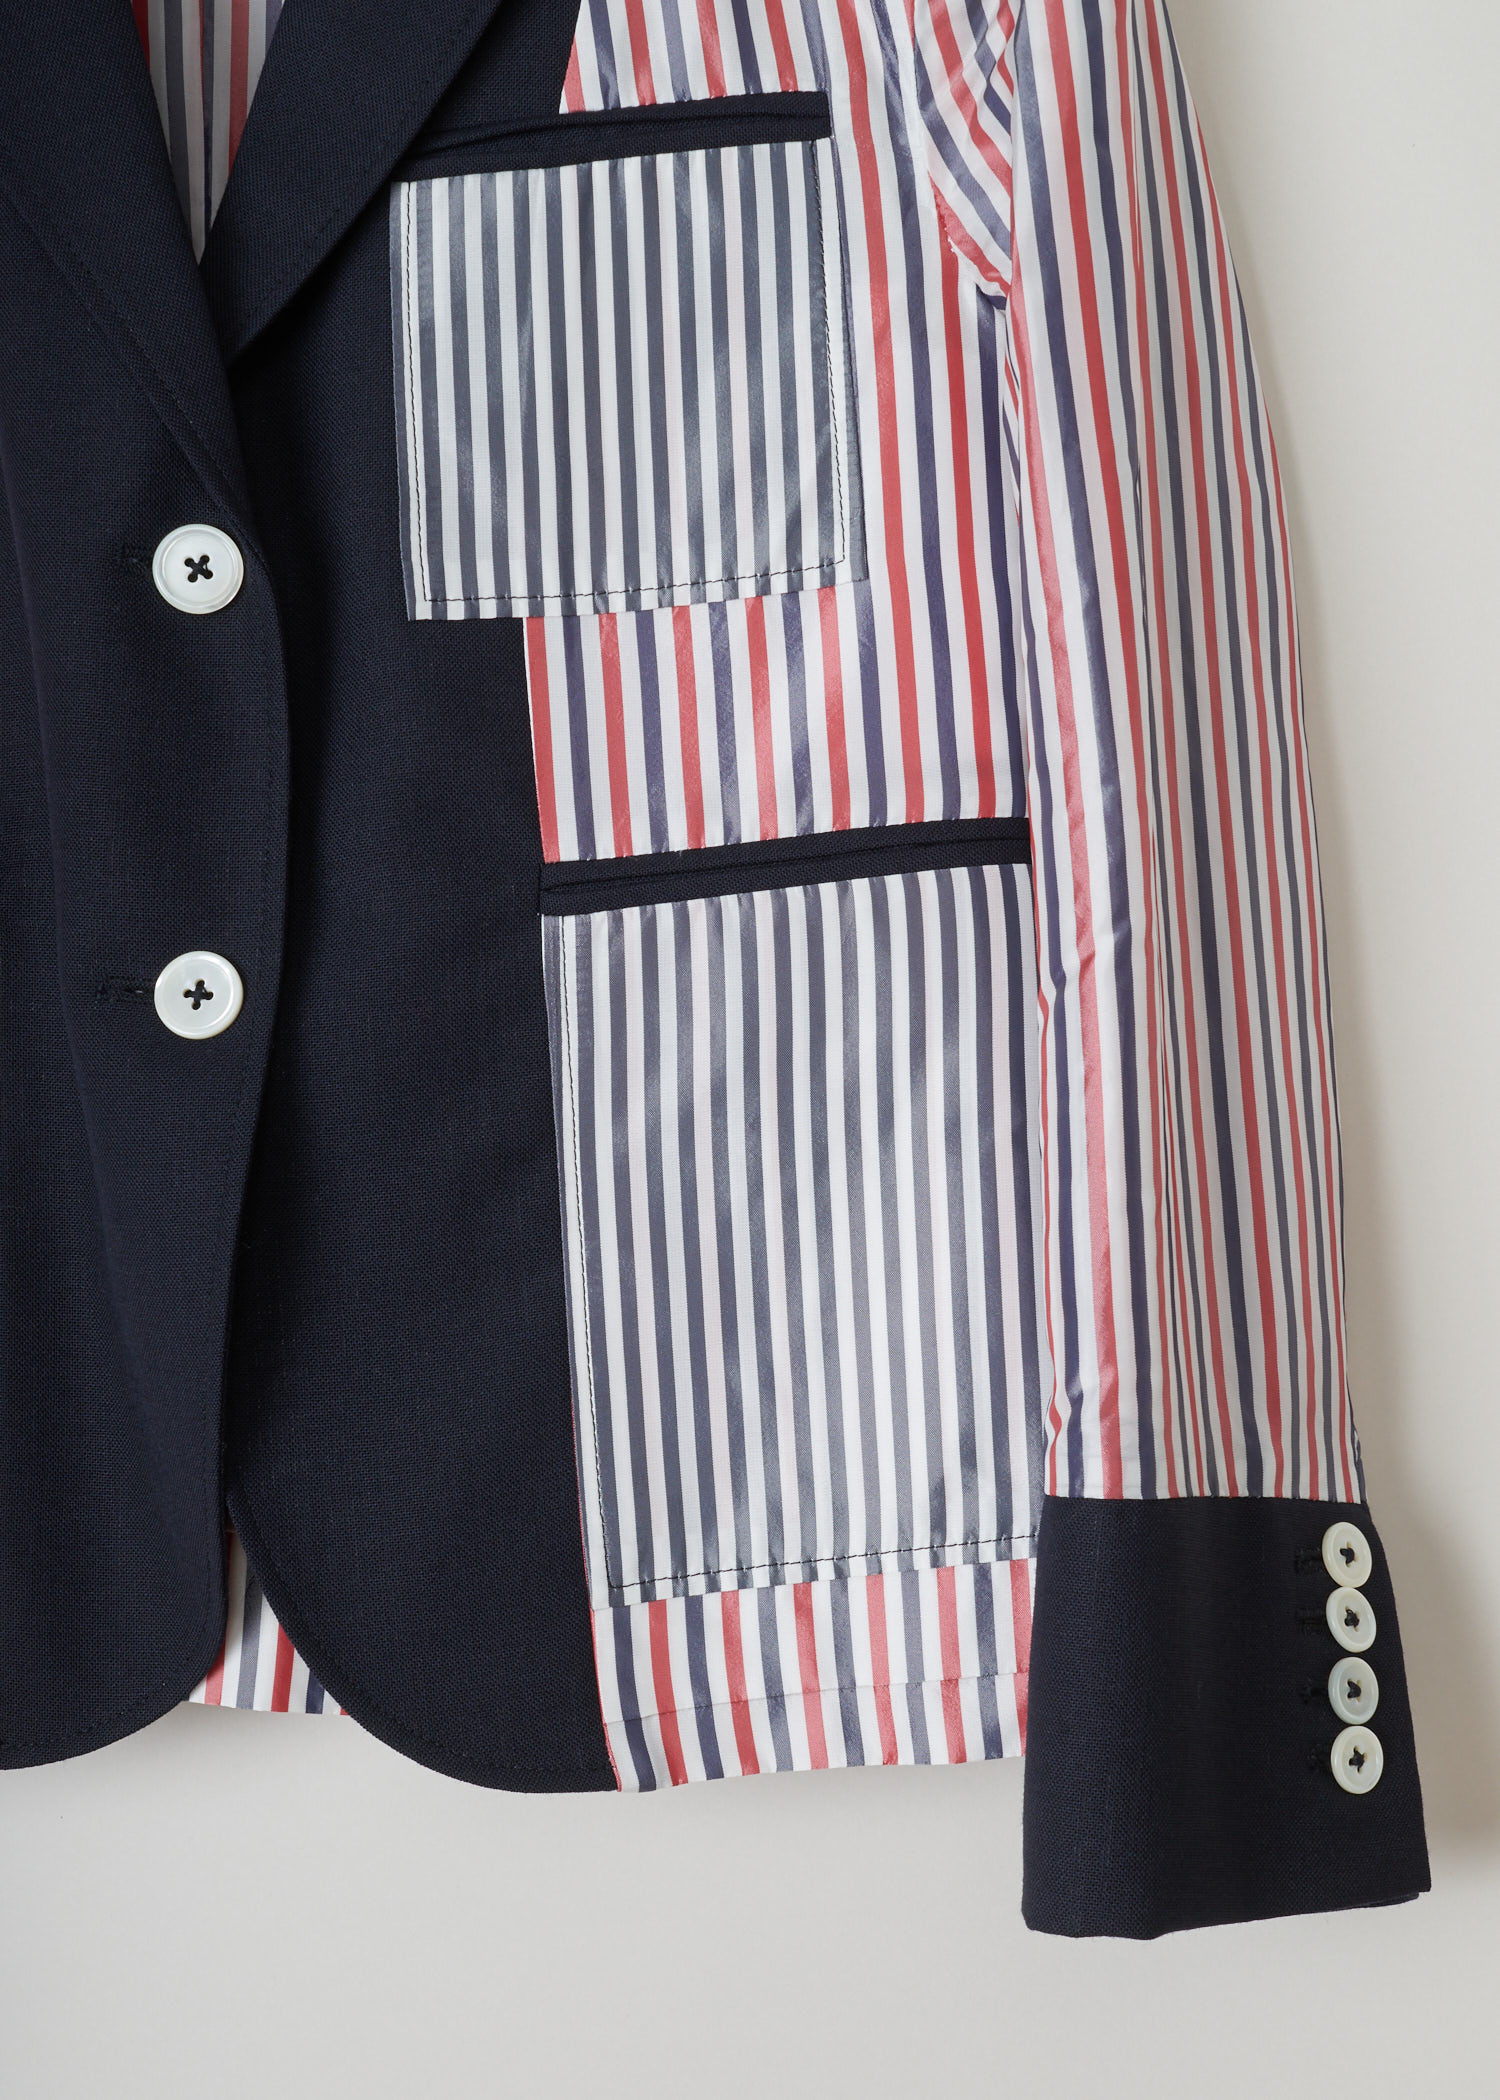 Thom Browne, Red and blue striped jacket, FBC510A_00473_415_navy, red white blue, detail1. This inside out jacket features a regular collar and a notched lapel. Going further down the long sleeves, you will find four buttoned cuffs. It has a single chest pocket and below that two jetted pockets. The jacket comes with the signature grosgrain  tab on the back.